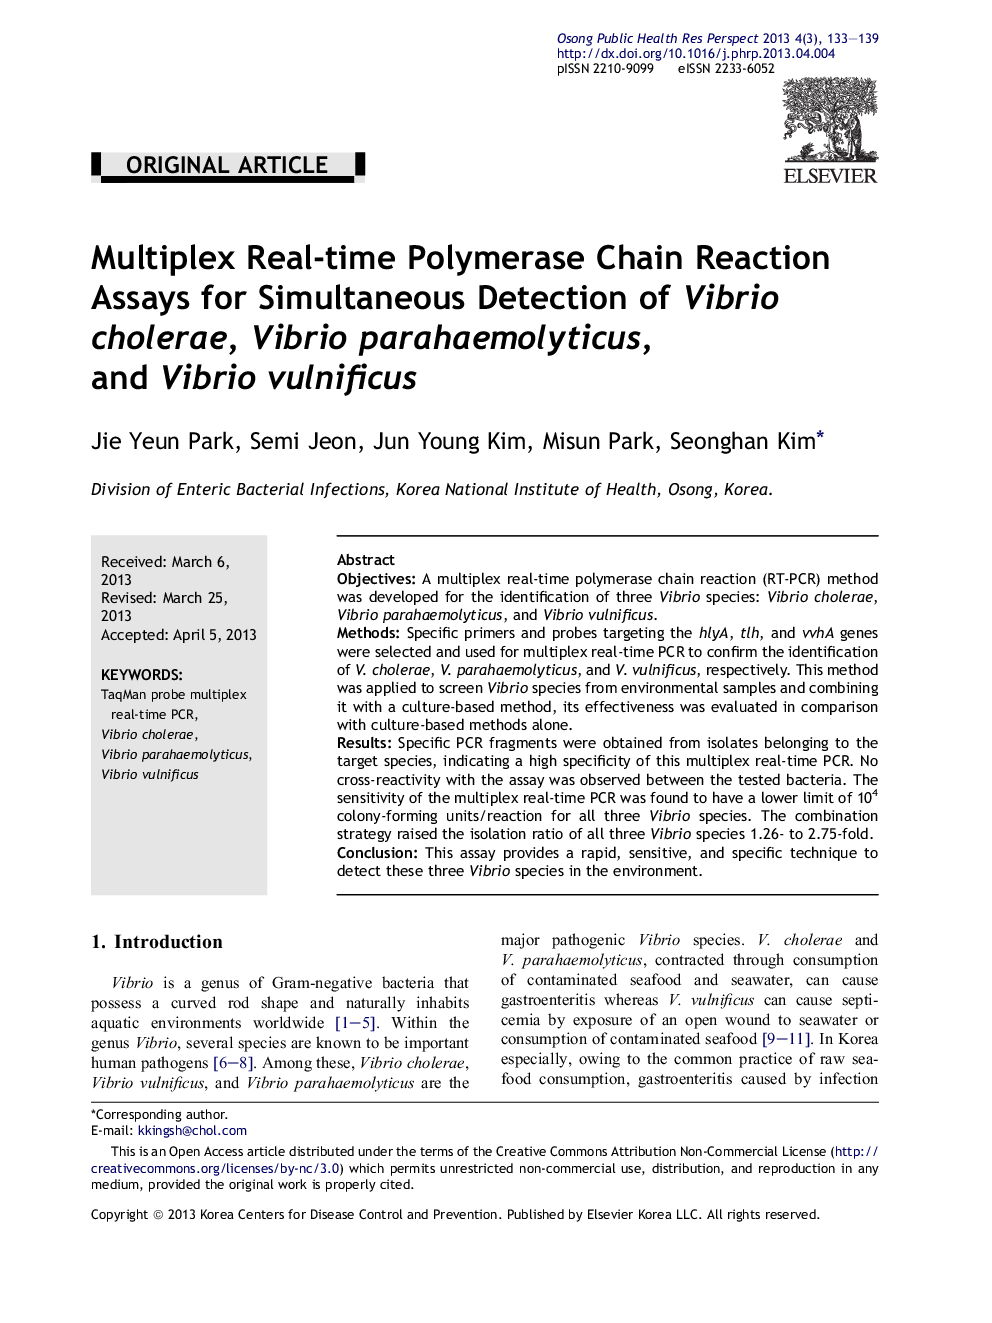 Multiplex Real-time Polymerase Chain Reaction Assays for Simultaneous Detection of Vibrio cholerae, Vibrio parahaemolyticus, and Vibrio vulnificus 